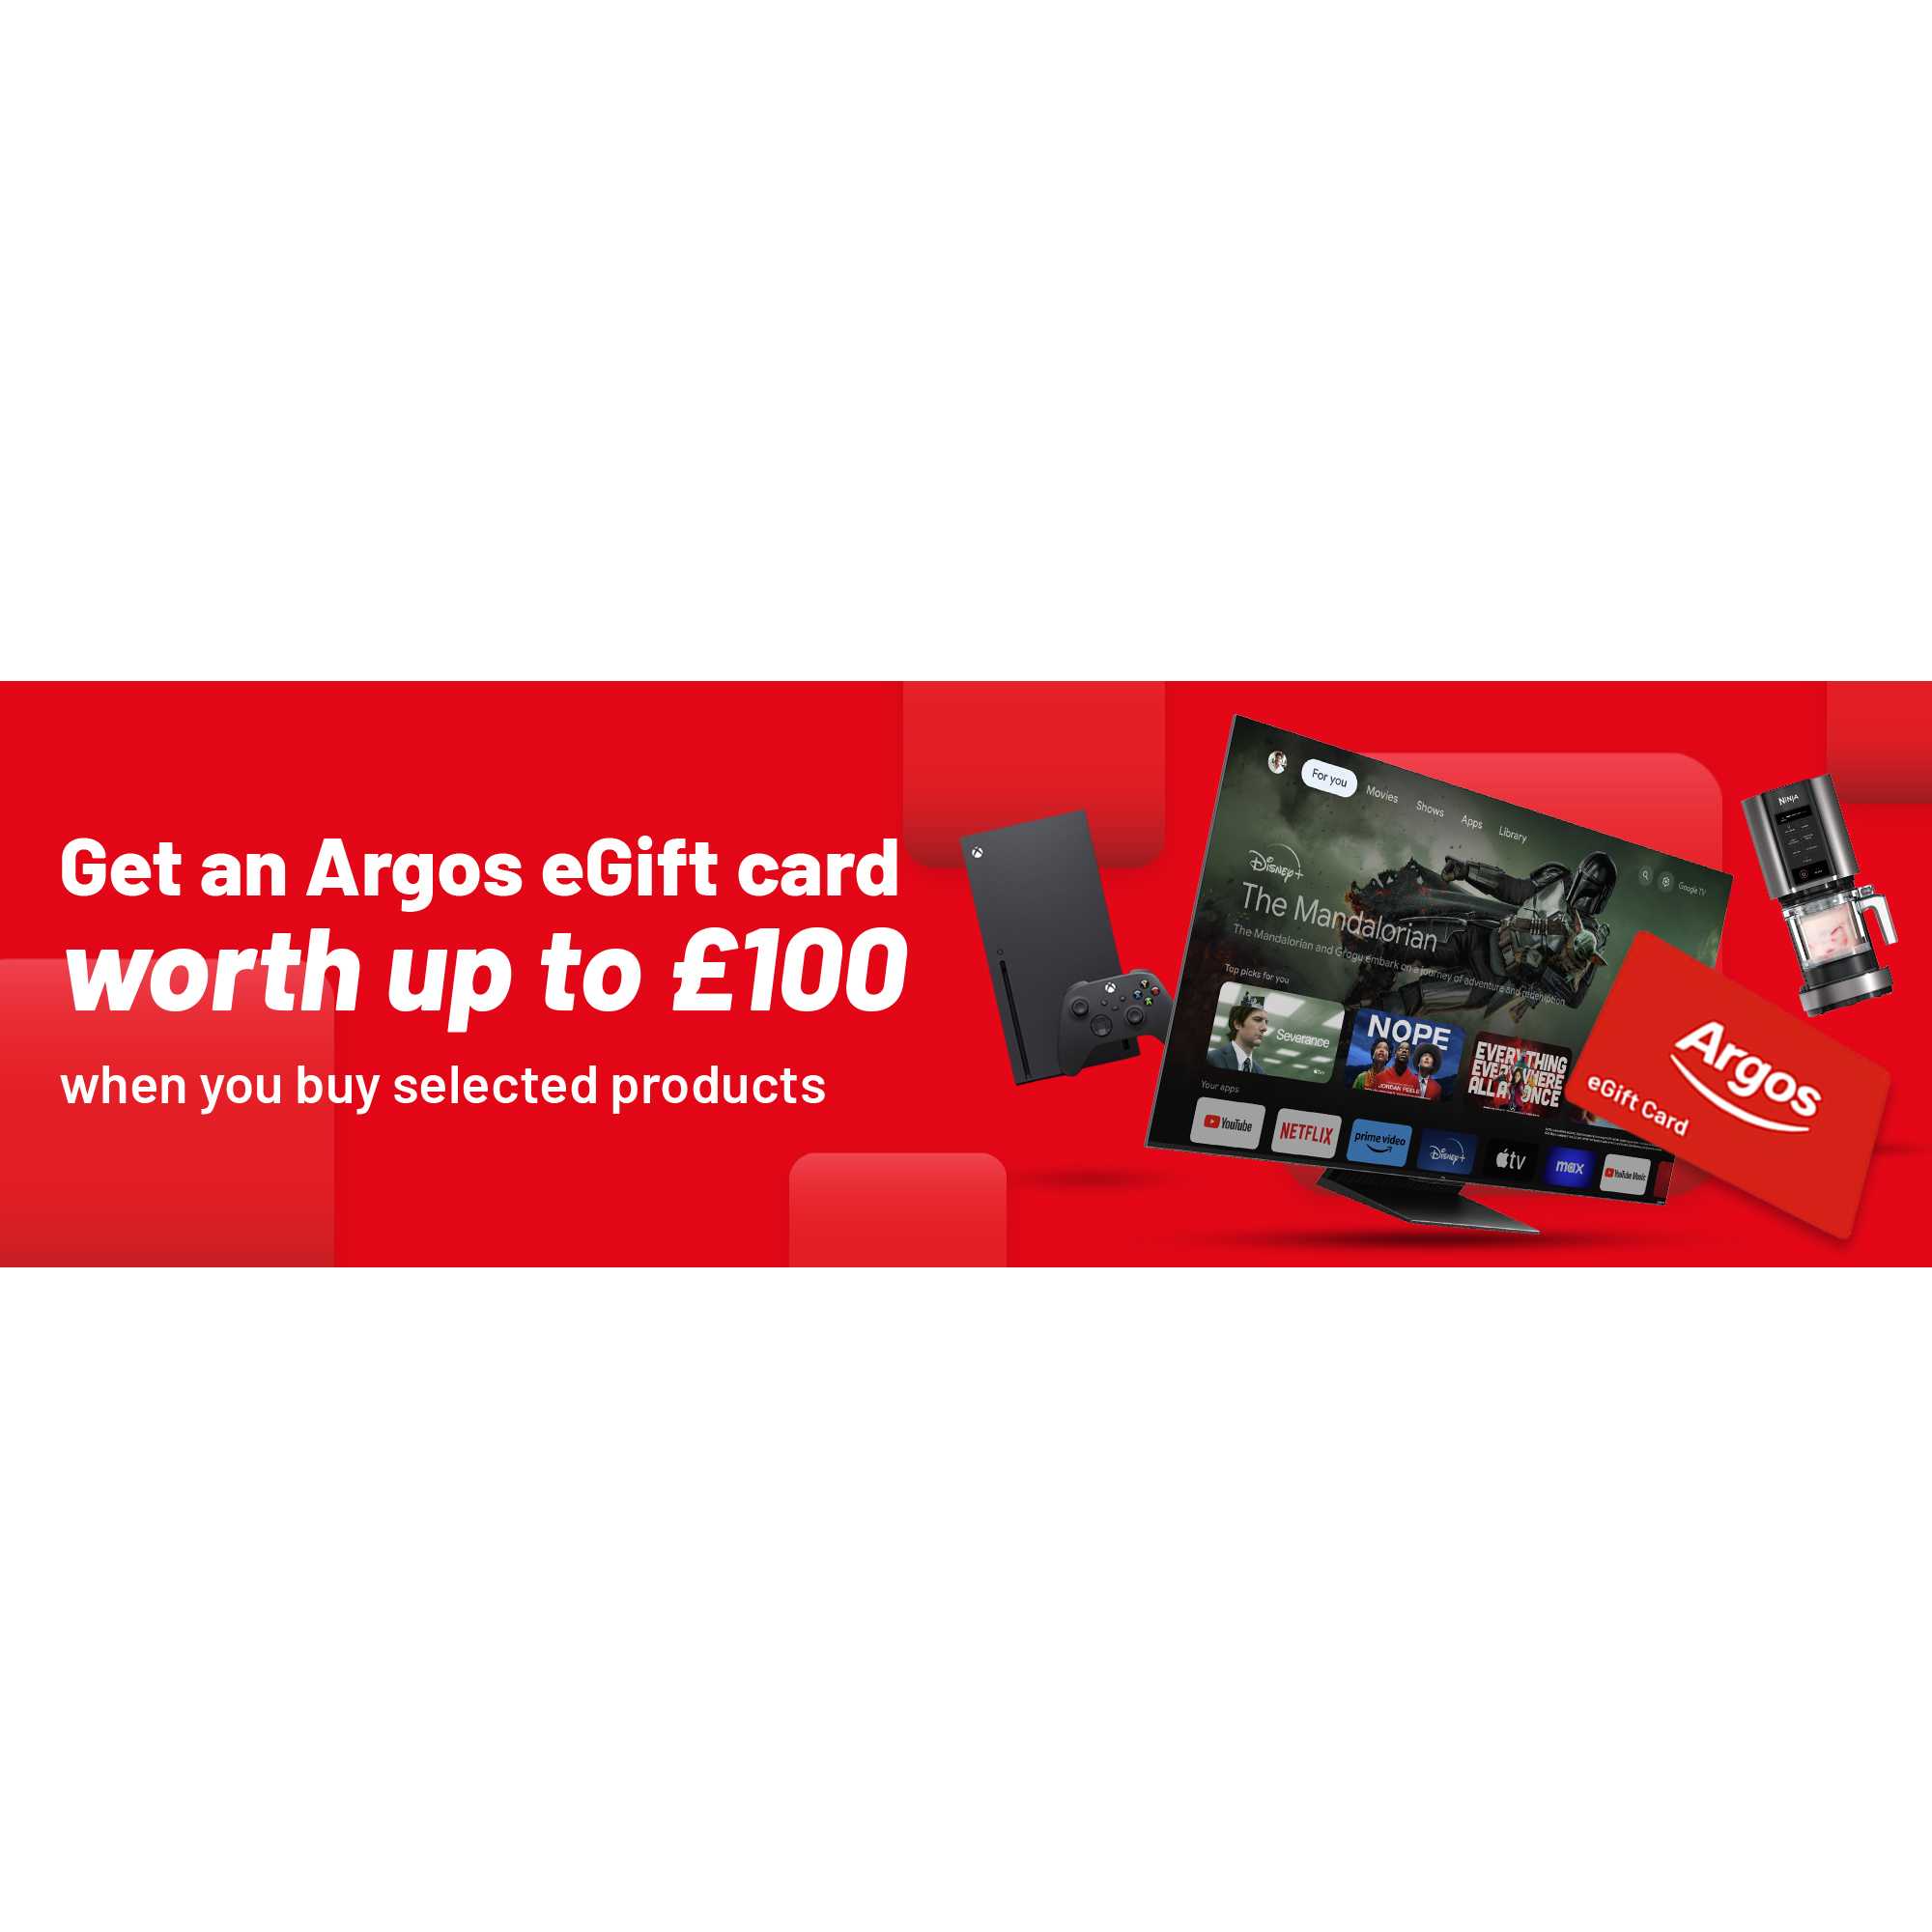 Get an Argos eGift card worth up to £100 when you buy selected products. From TVs and gaming to kitchen appliances and more. Claim your eGift card from 16 April. 